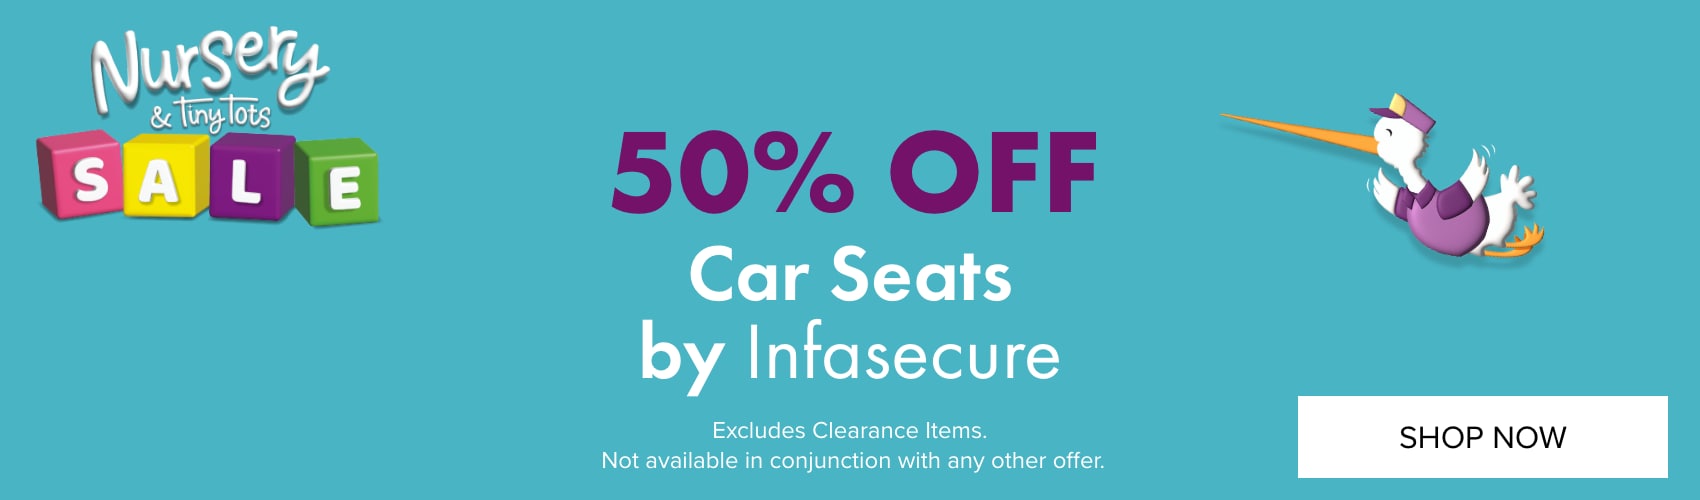 50% OFF Car Seats by Infasecure